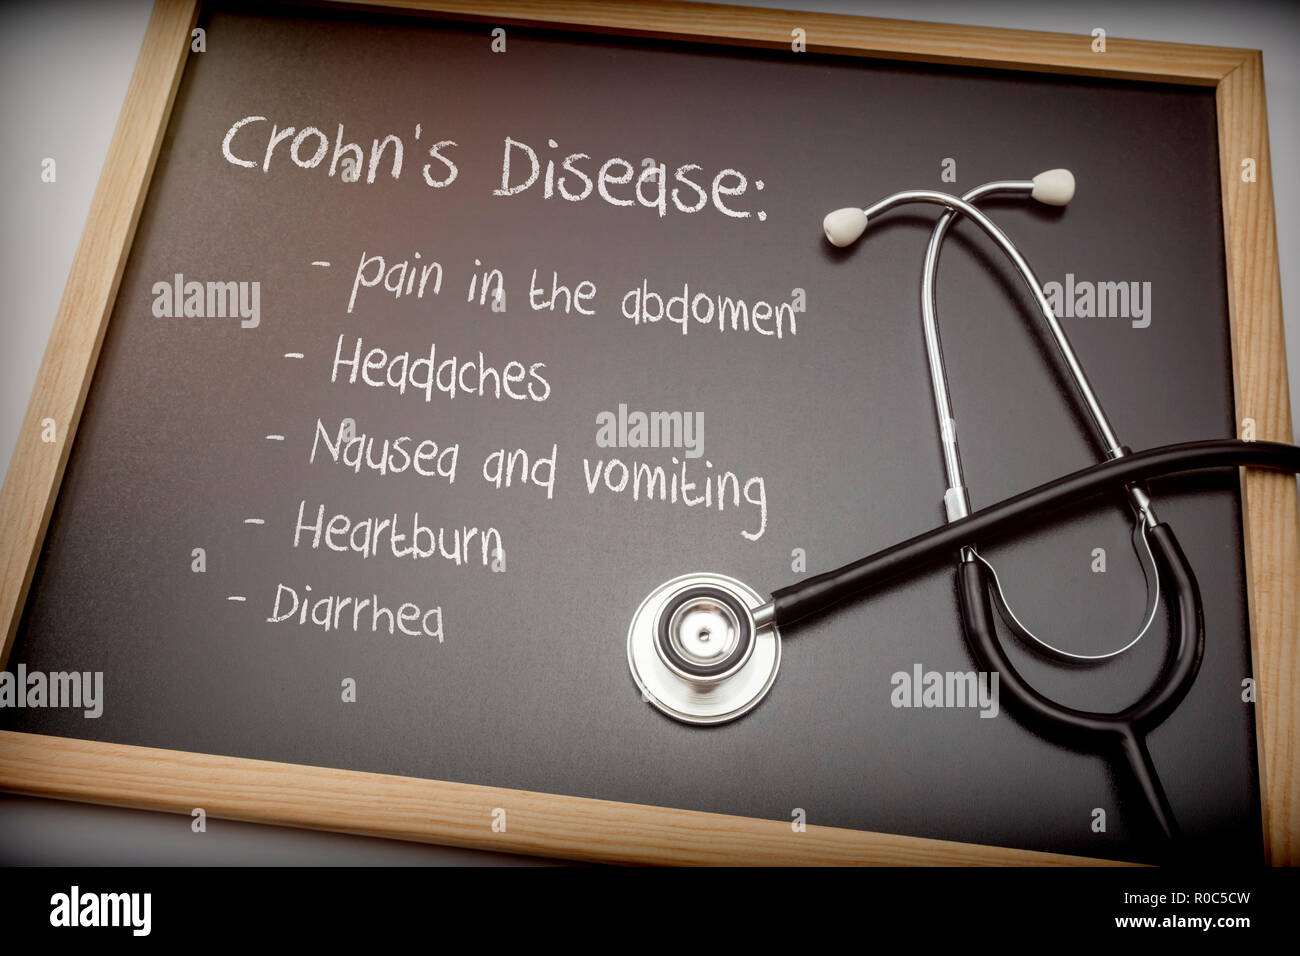 Crohn's disease can have these symptoms diarrhea, Headaches, Heartburn, Nausea and vomiting, Pain in the abdomen, Written on a blackboard next to a st Stock Photo